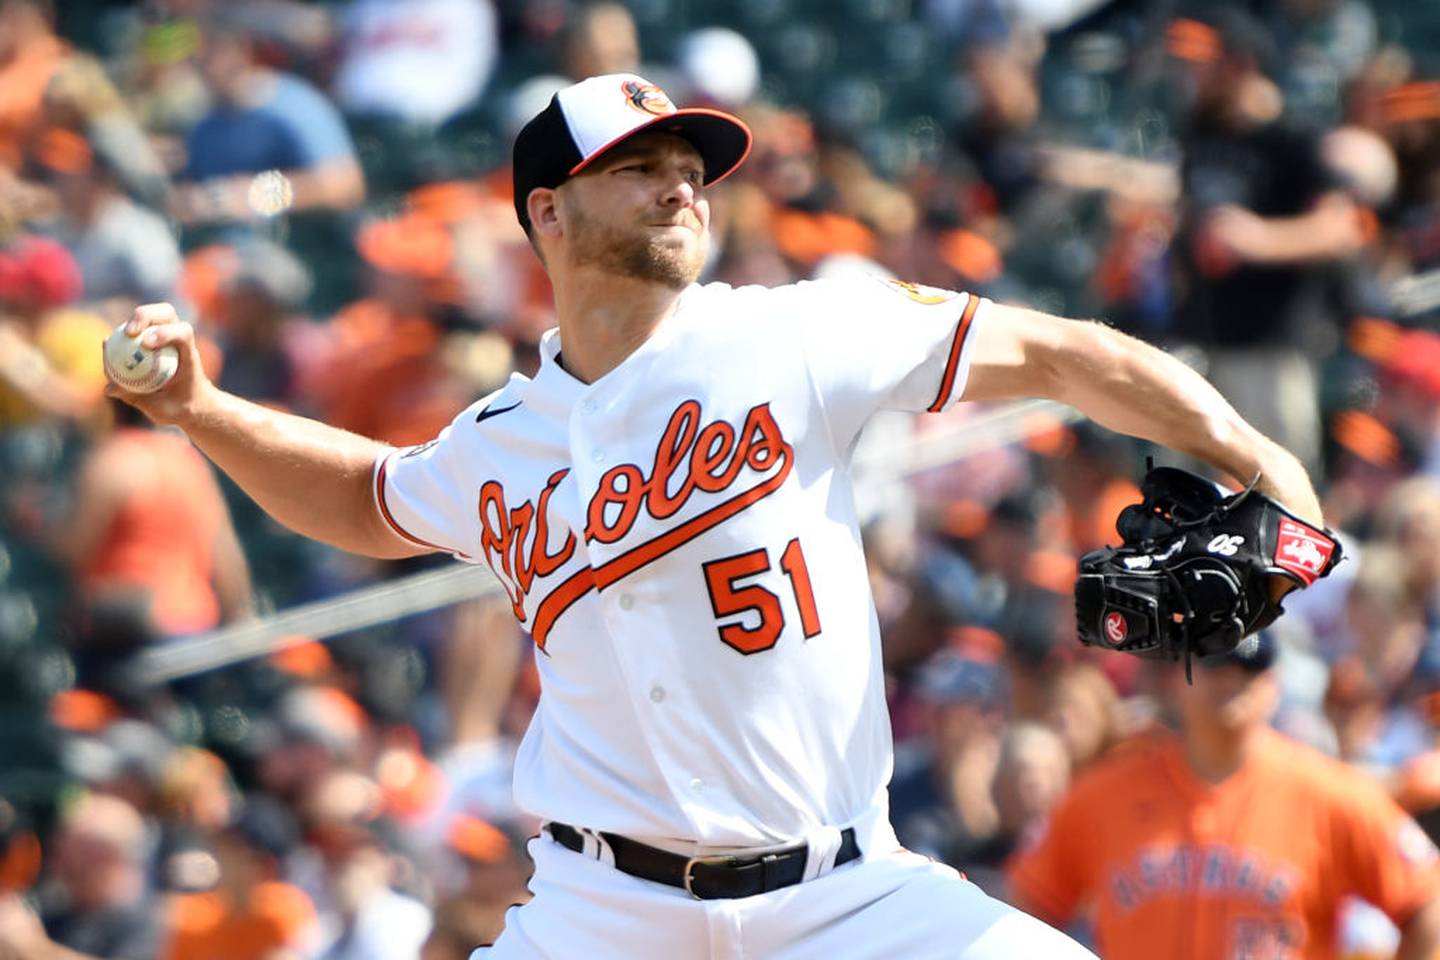 BALTIMORE, MD - SEPTEMBER 25:  Austin Voth #51 of the Baltimore Orioles pitches in the first inning during a baseball game against the Houston Astros at Oriole Park at Camden Yards on September 25, 2022 in Baltimore, Maryland.